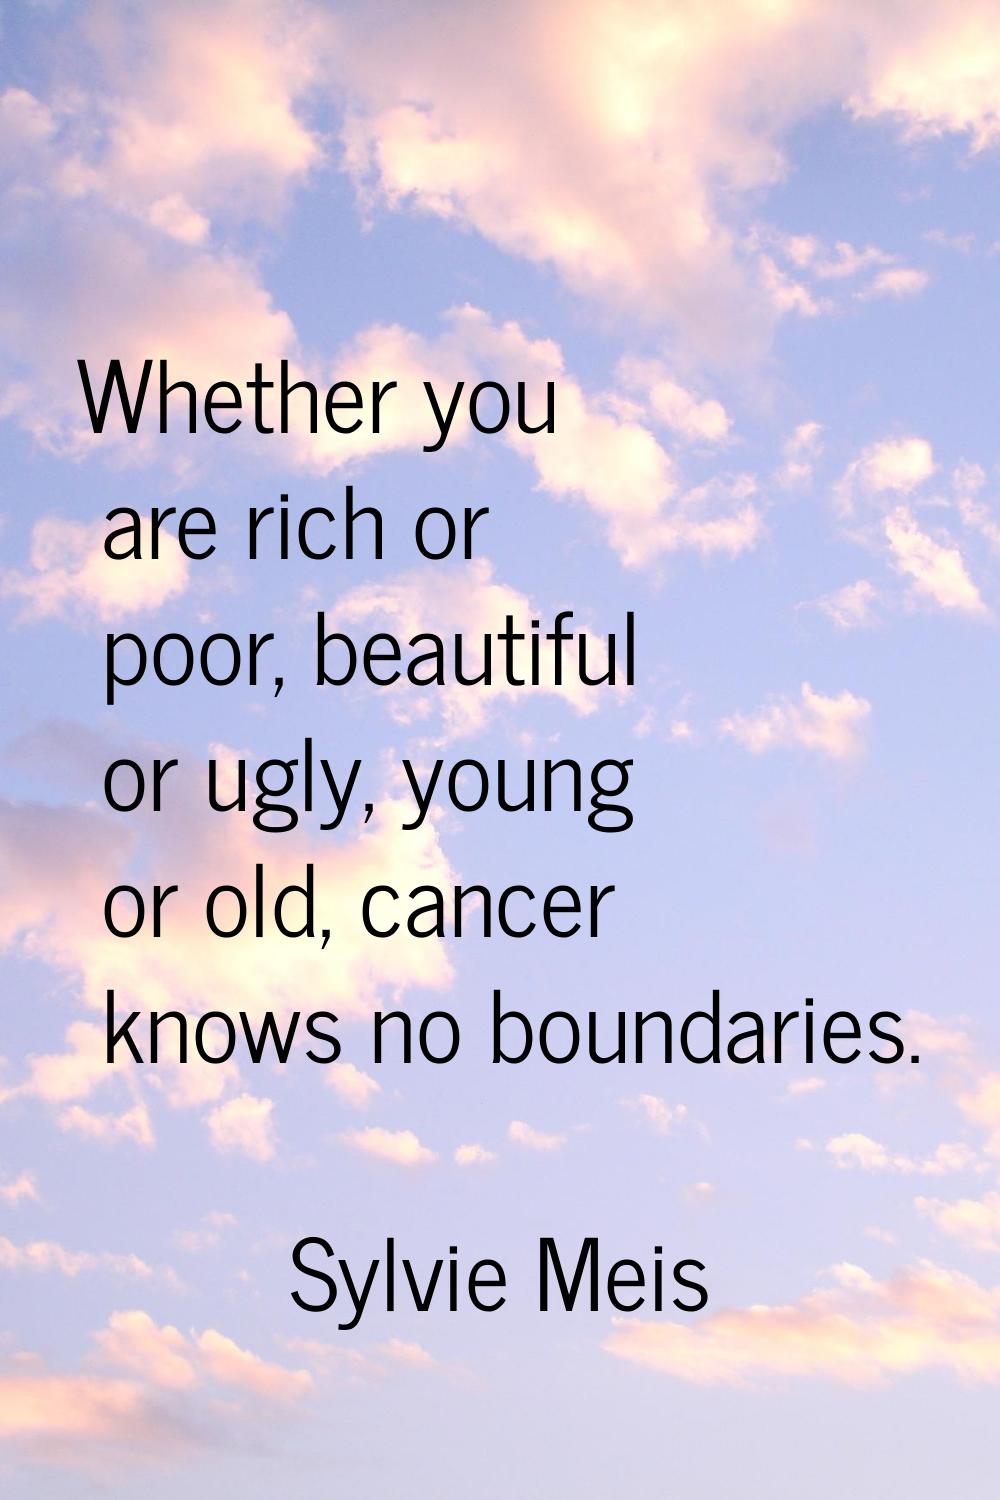 Whether you are rich or poor, beautiful or ugly, young or old, cancer knows no boundaries.